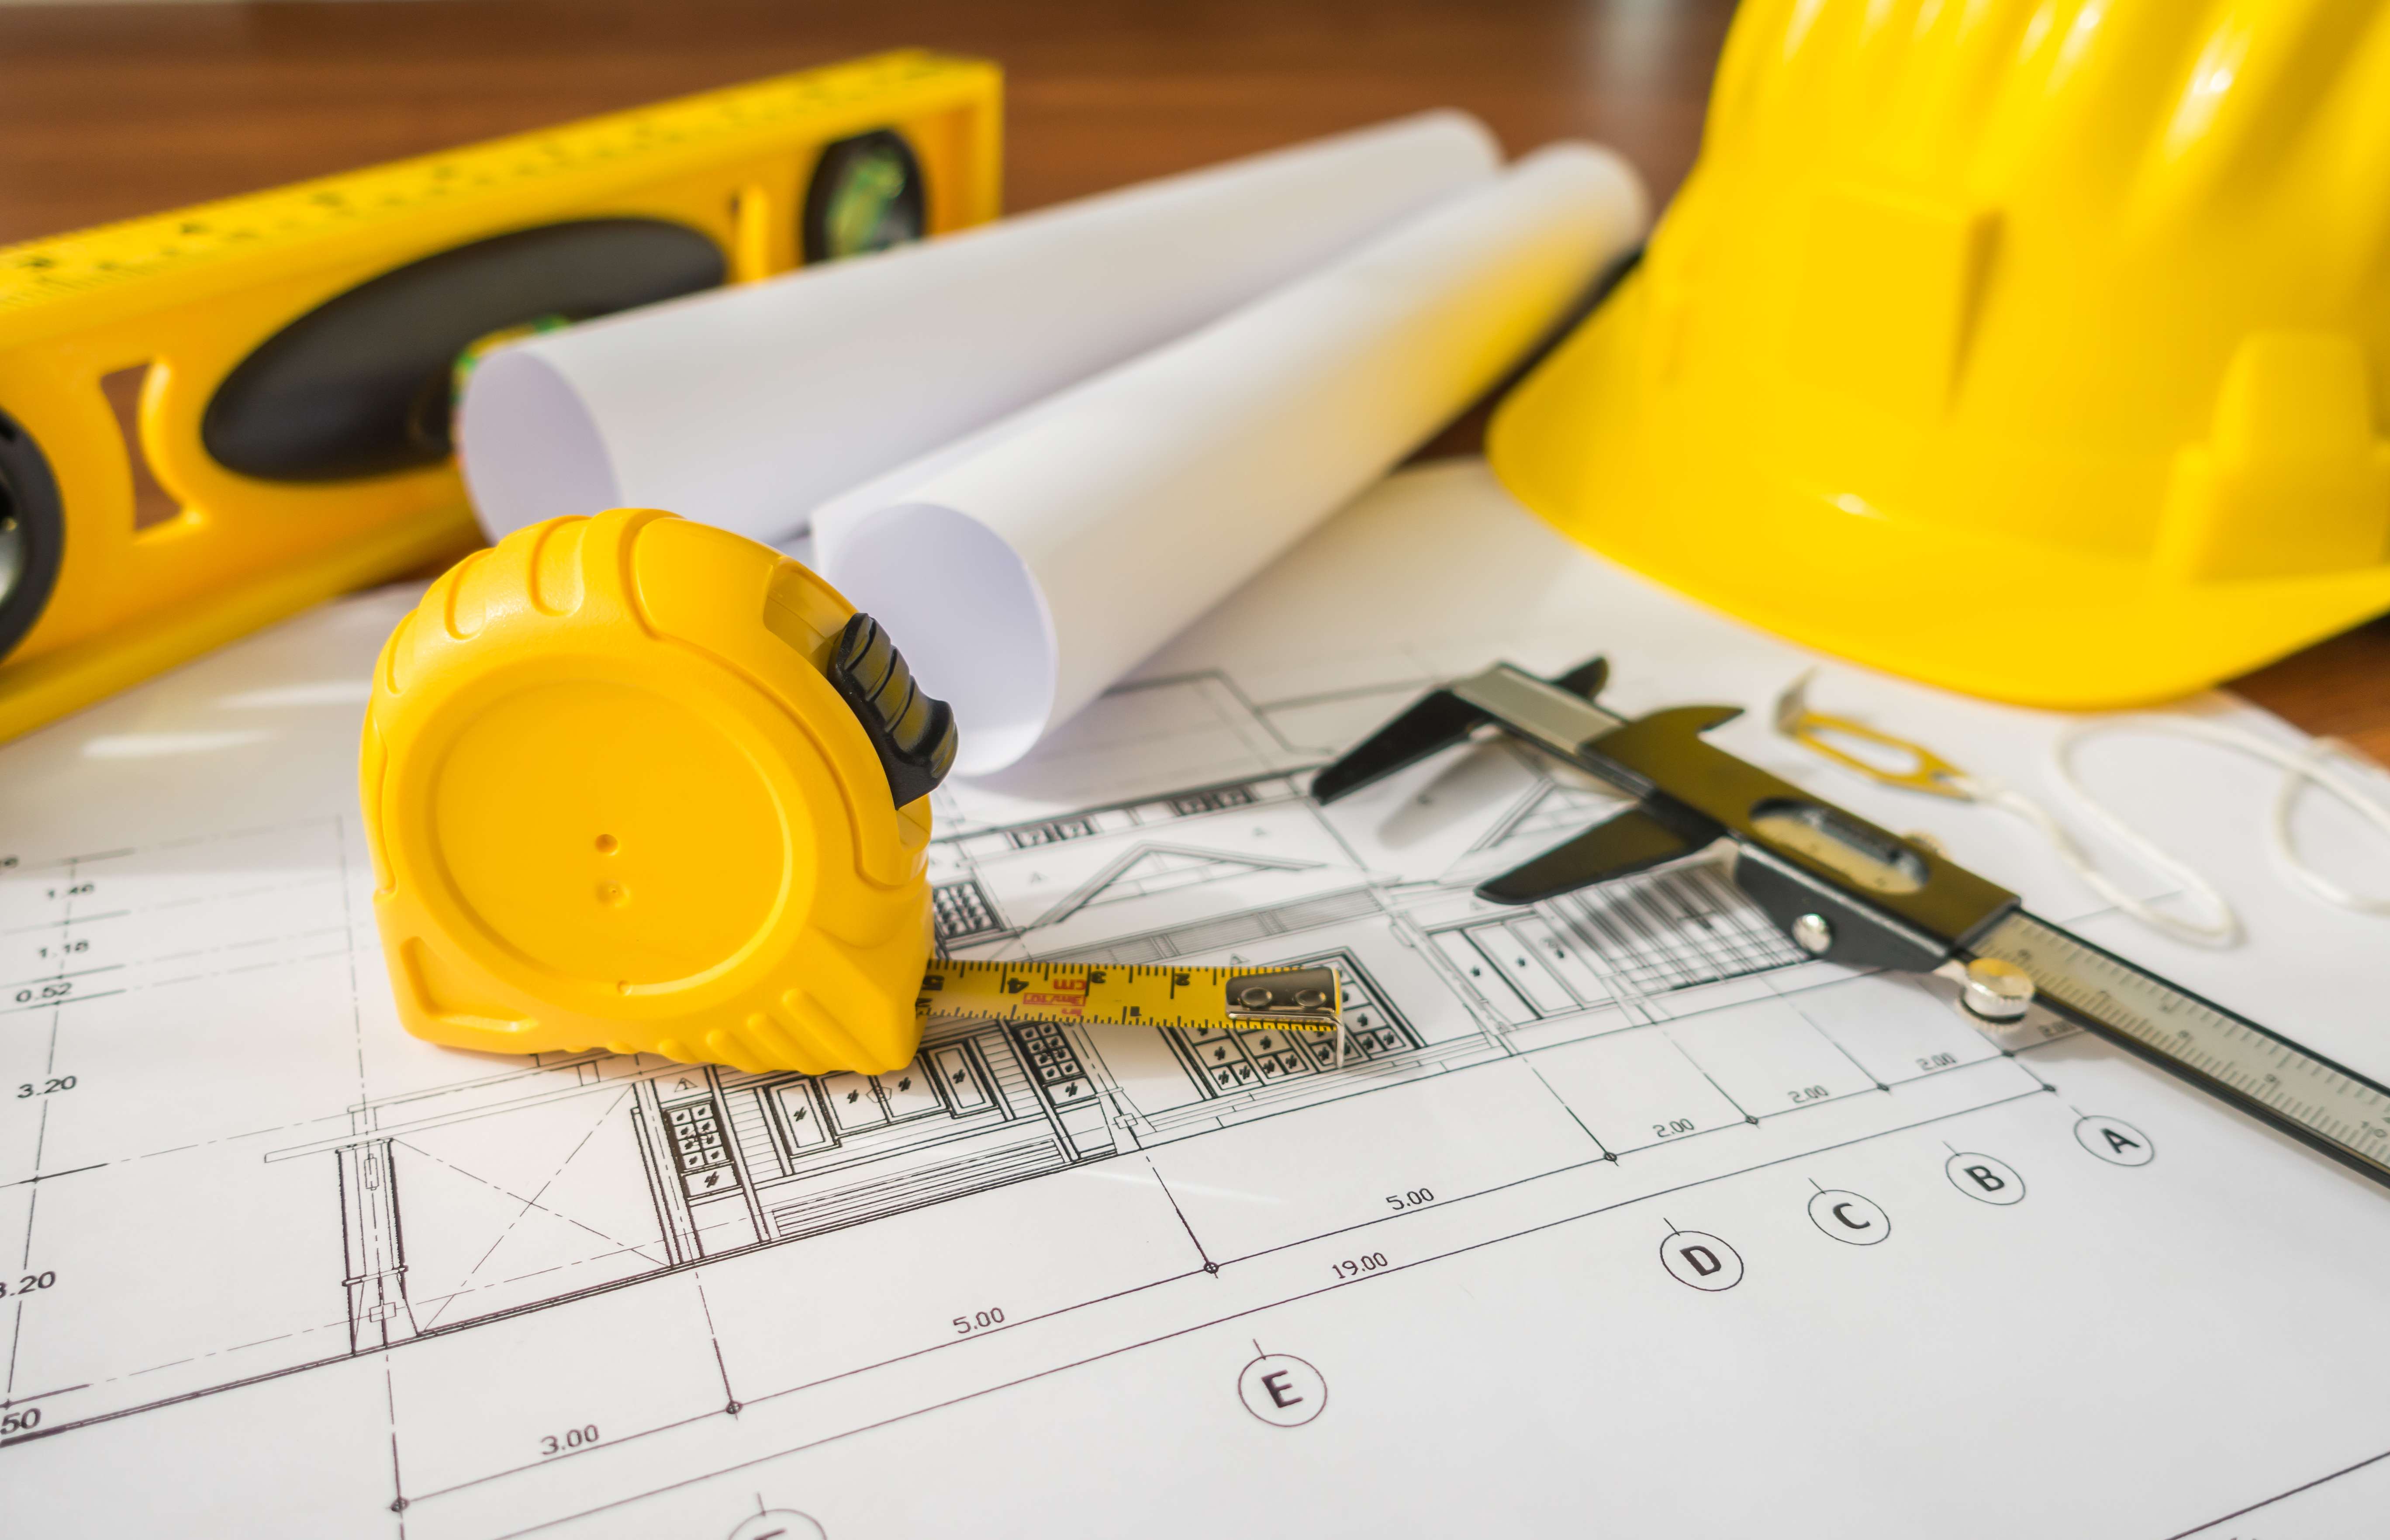 construction-plans-with-yellow-helmet-drawing-tools-bluep (1).jpg